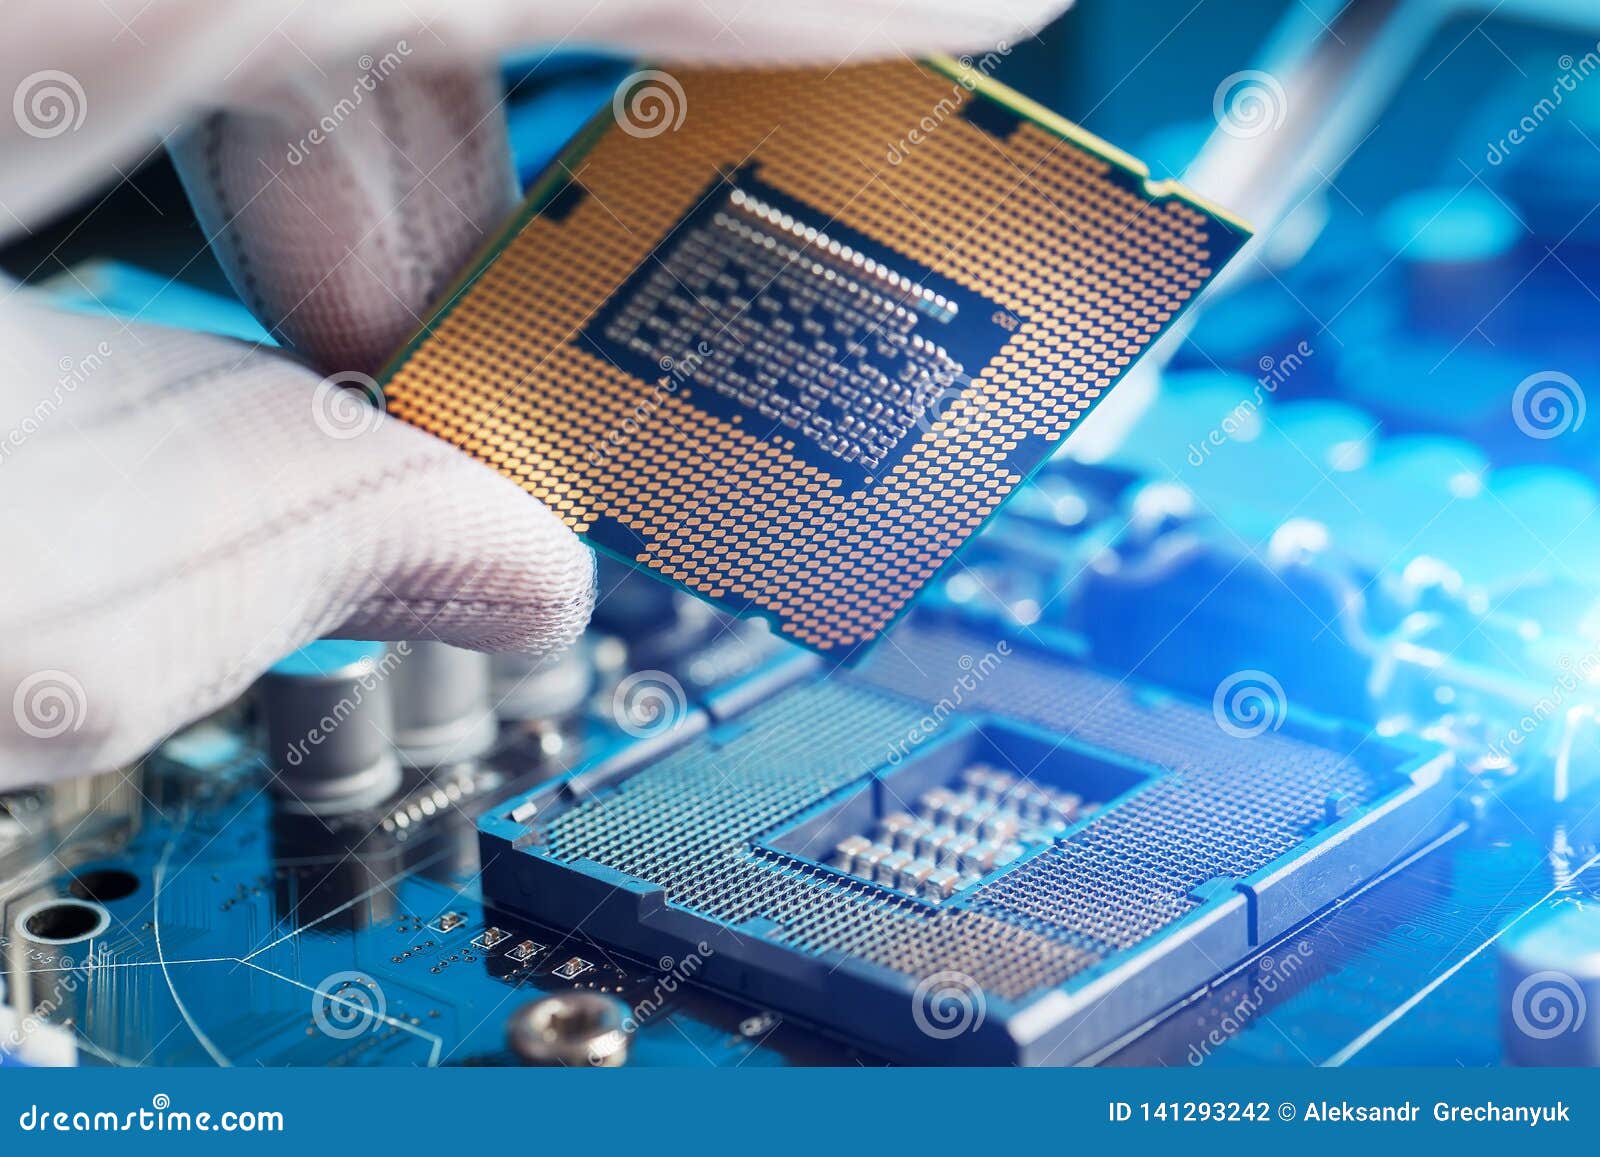 electronic engineer of computer technology. maintenance computer cpu hardware upgrade of motherboard component. pc repair,